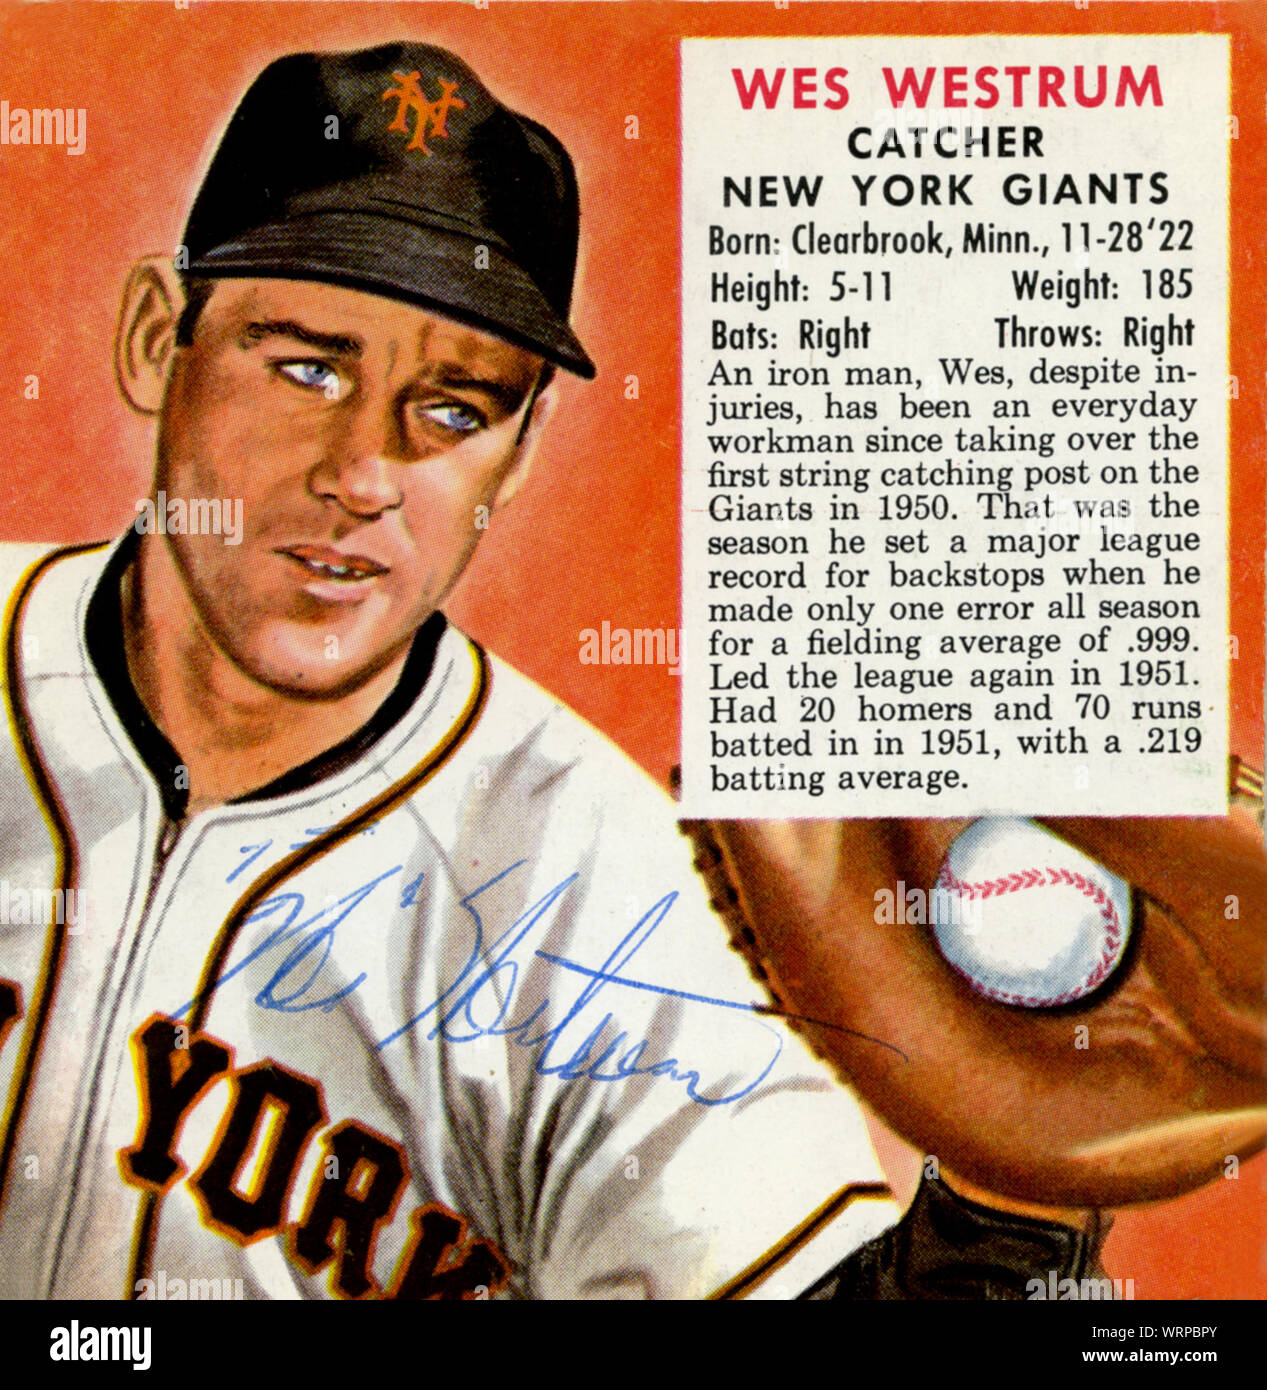 1950s era autographed baseball card depicting Wes Westrum a catcher with the New York Giants. Stock Photo